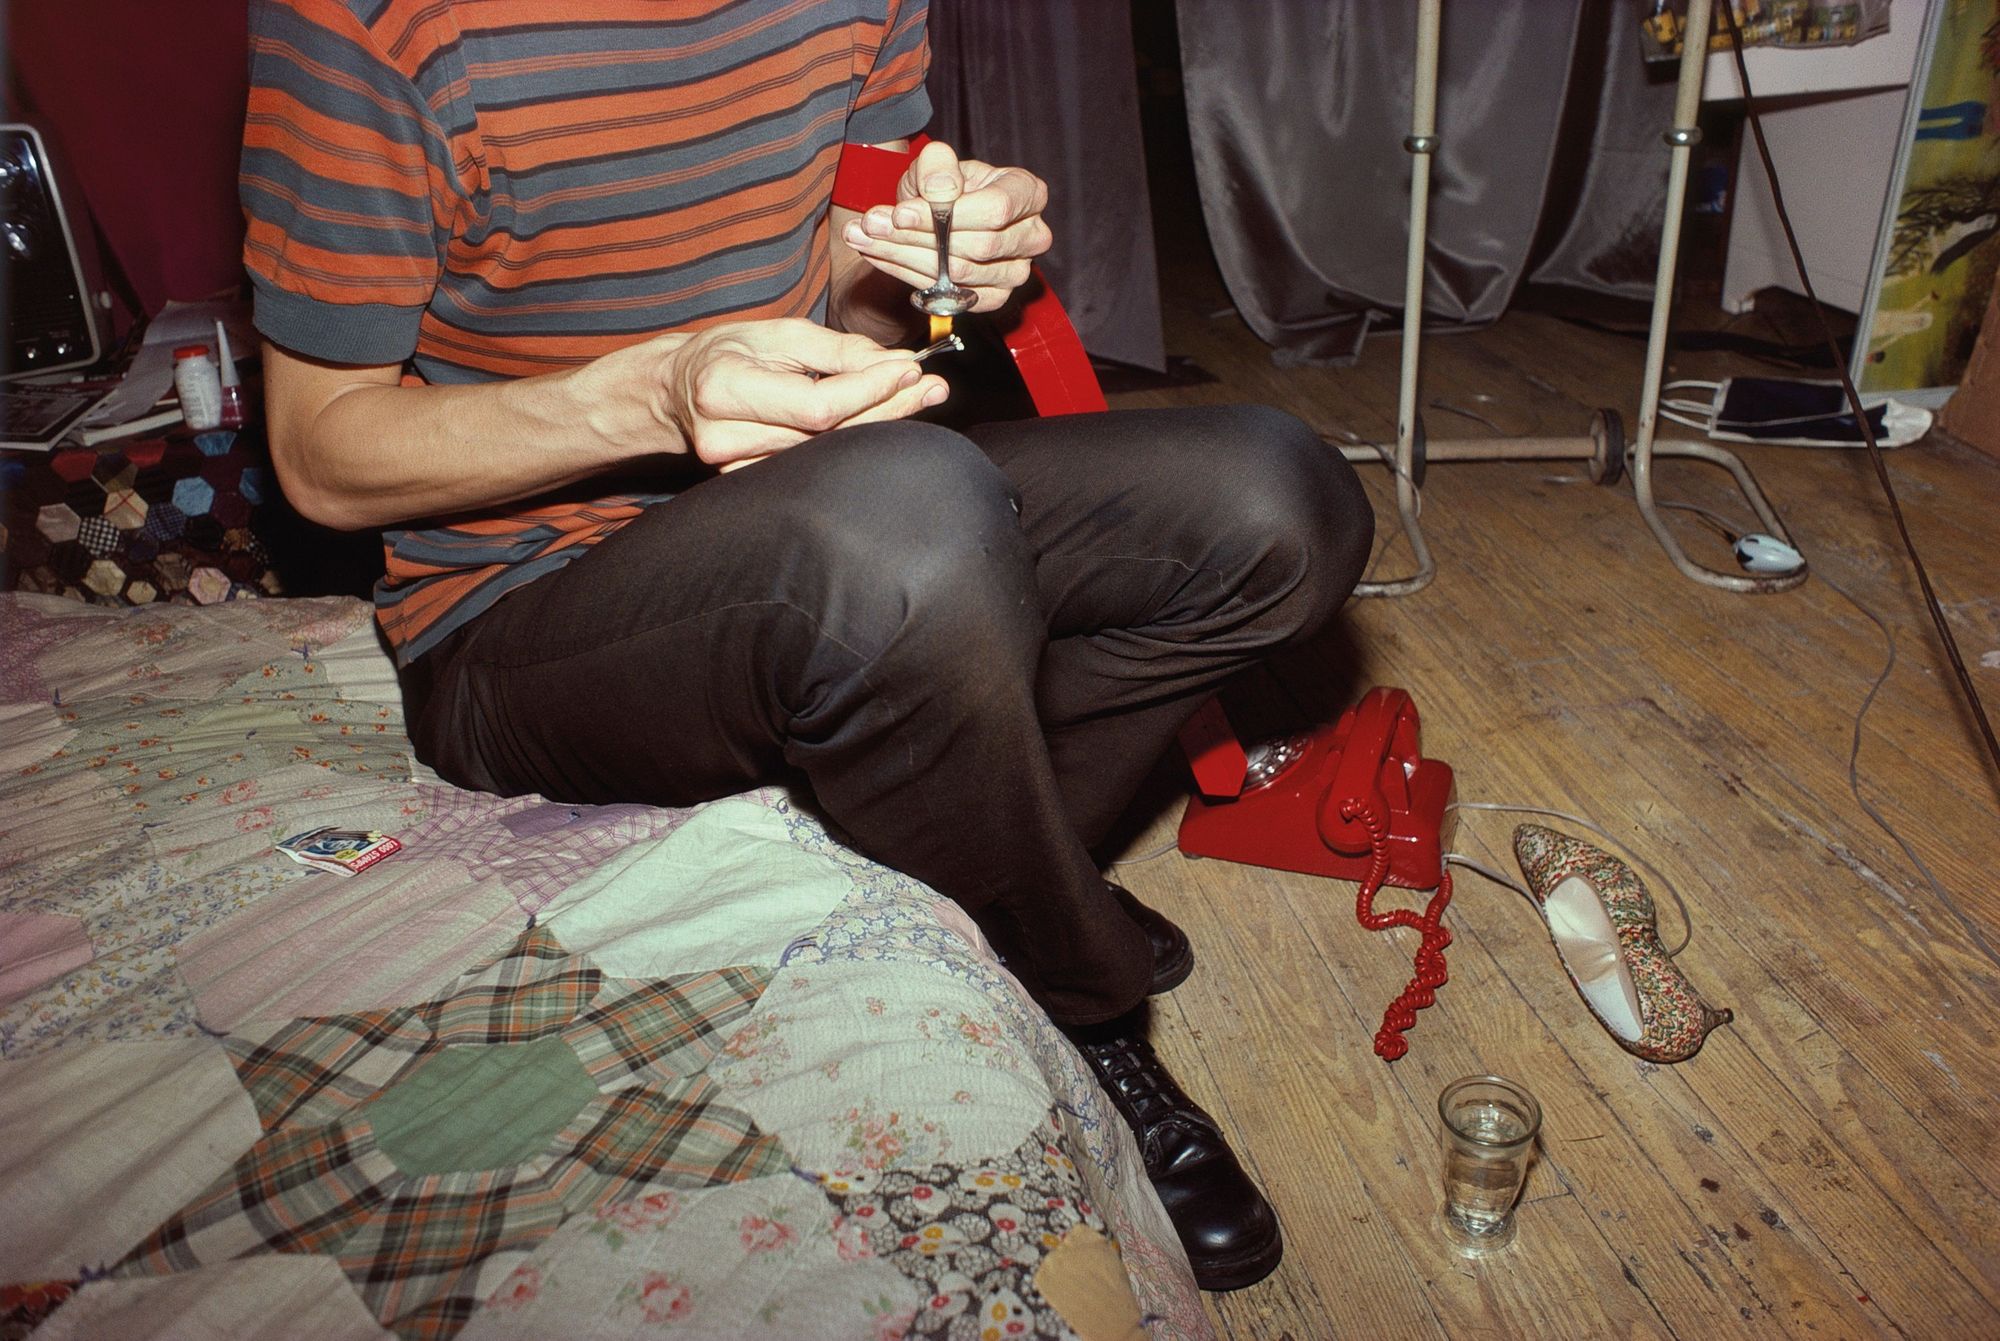 A man heats a spoon or heroin, sitting on a bed